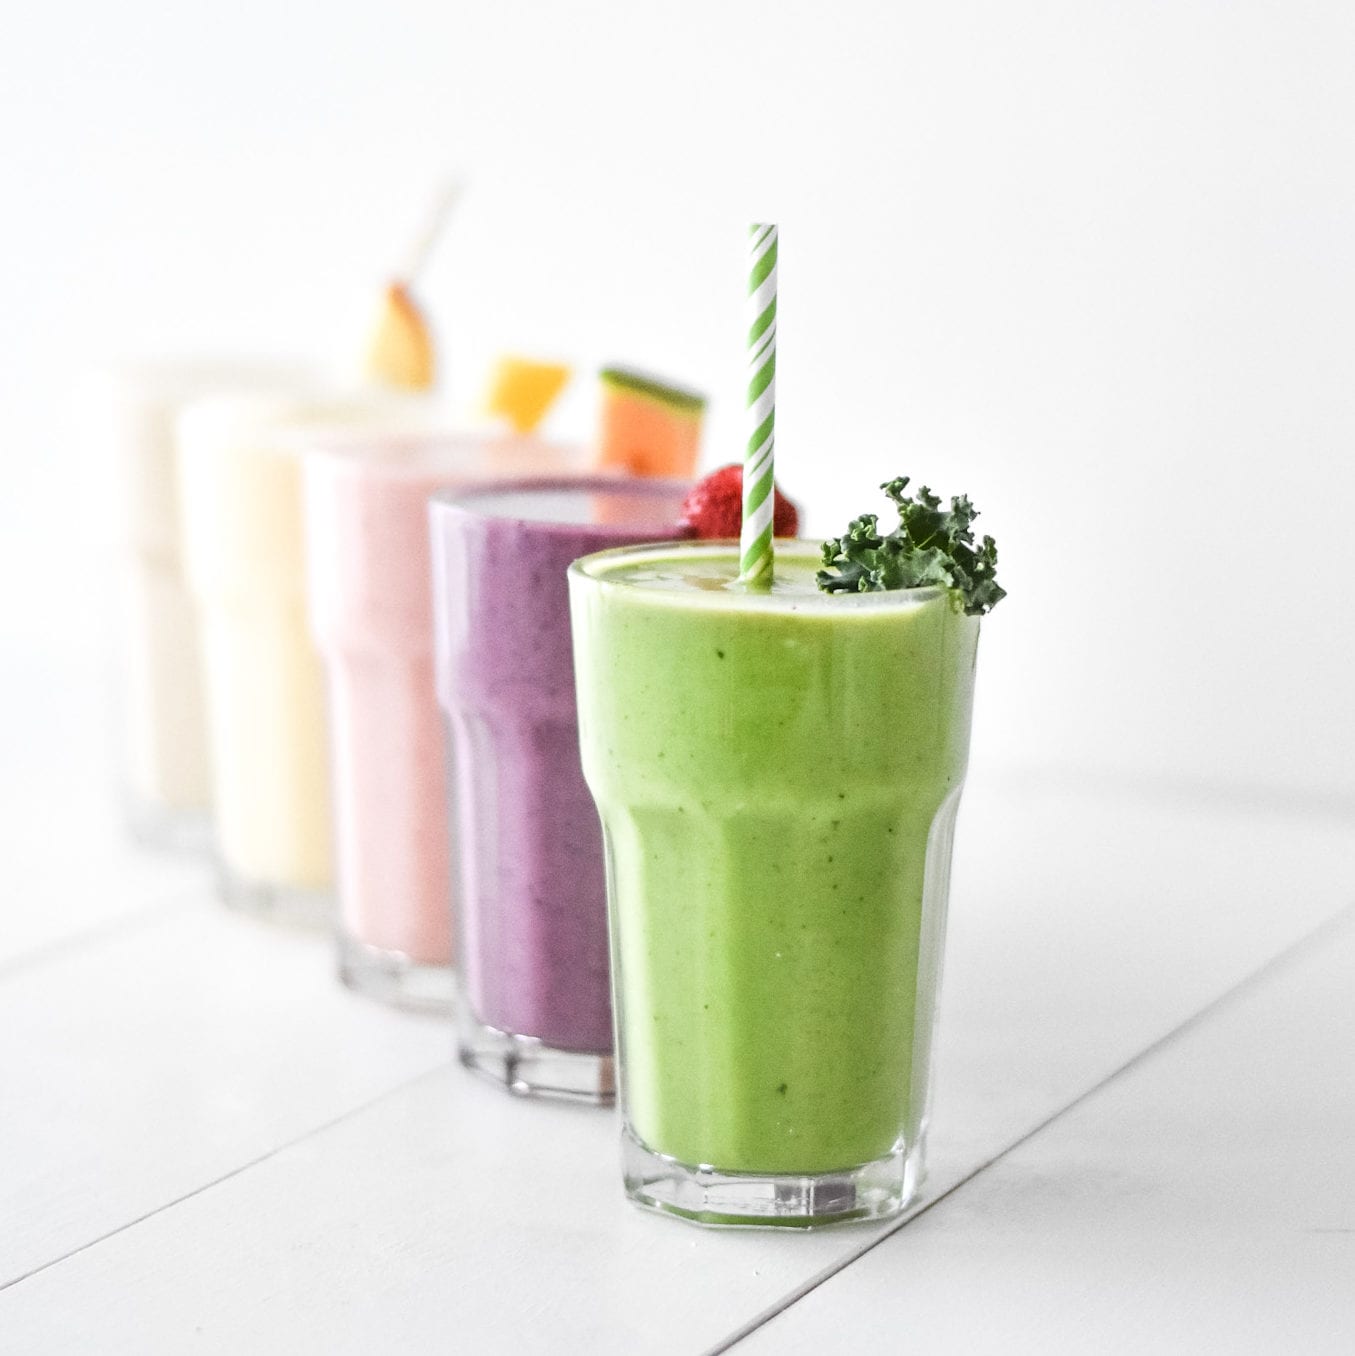 https://fraicheliving.com/wp-content/uploads/2015/10/line-of-5-day-smoothie-challenge.jpg